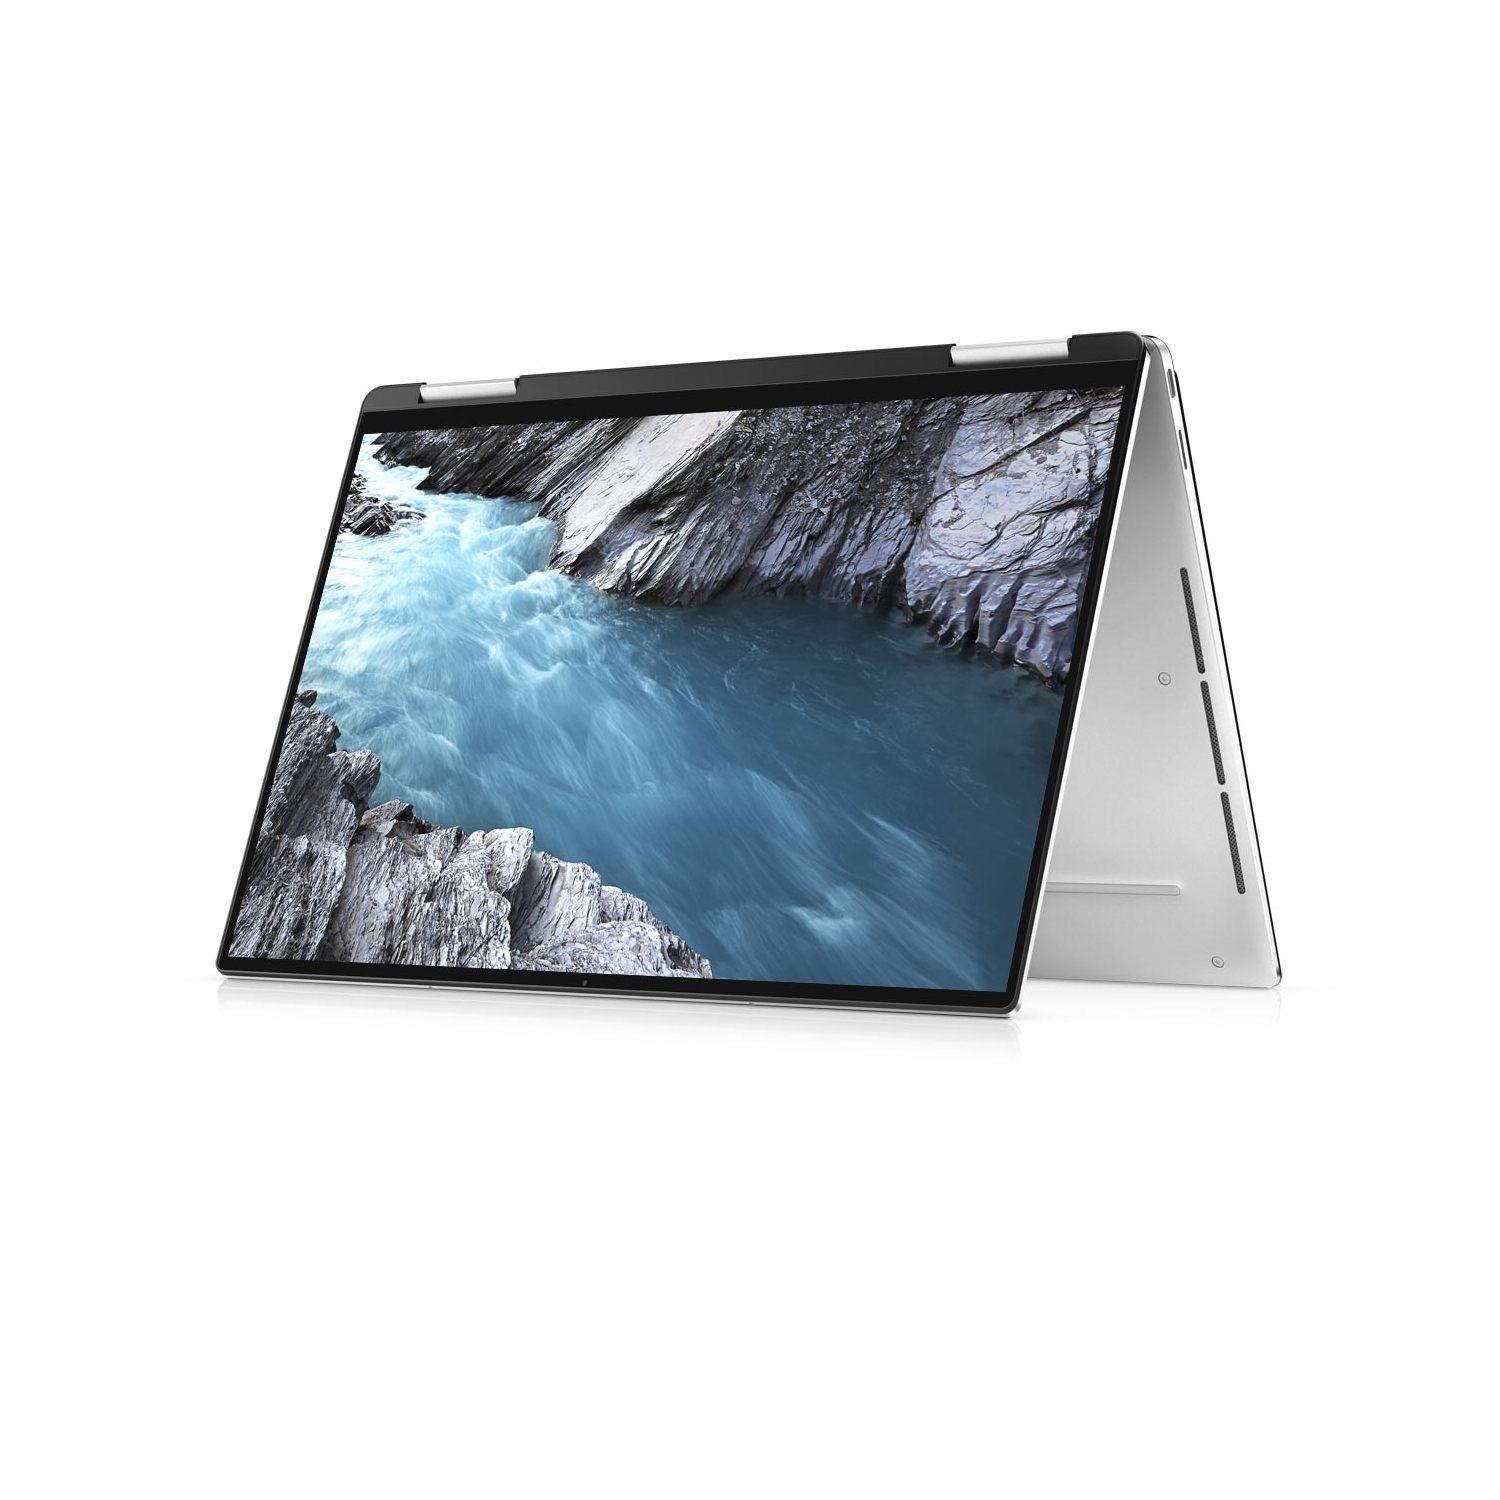 Refurbished (Excellent) - Dell XPS 13 7390 2-in-1 (2019) | 13.4" FHD+ Touch | Core i5 - 256GB SSD - 8GB RAM | 4 Cores @ 3.6 GHz - 10th Gen CPU Certified Refurbished